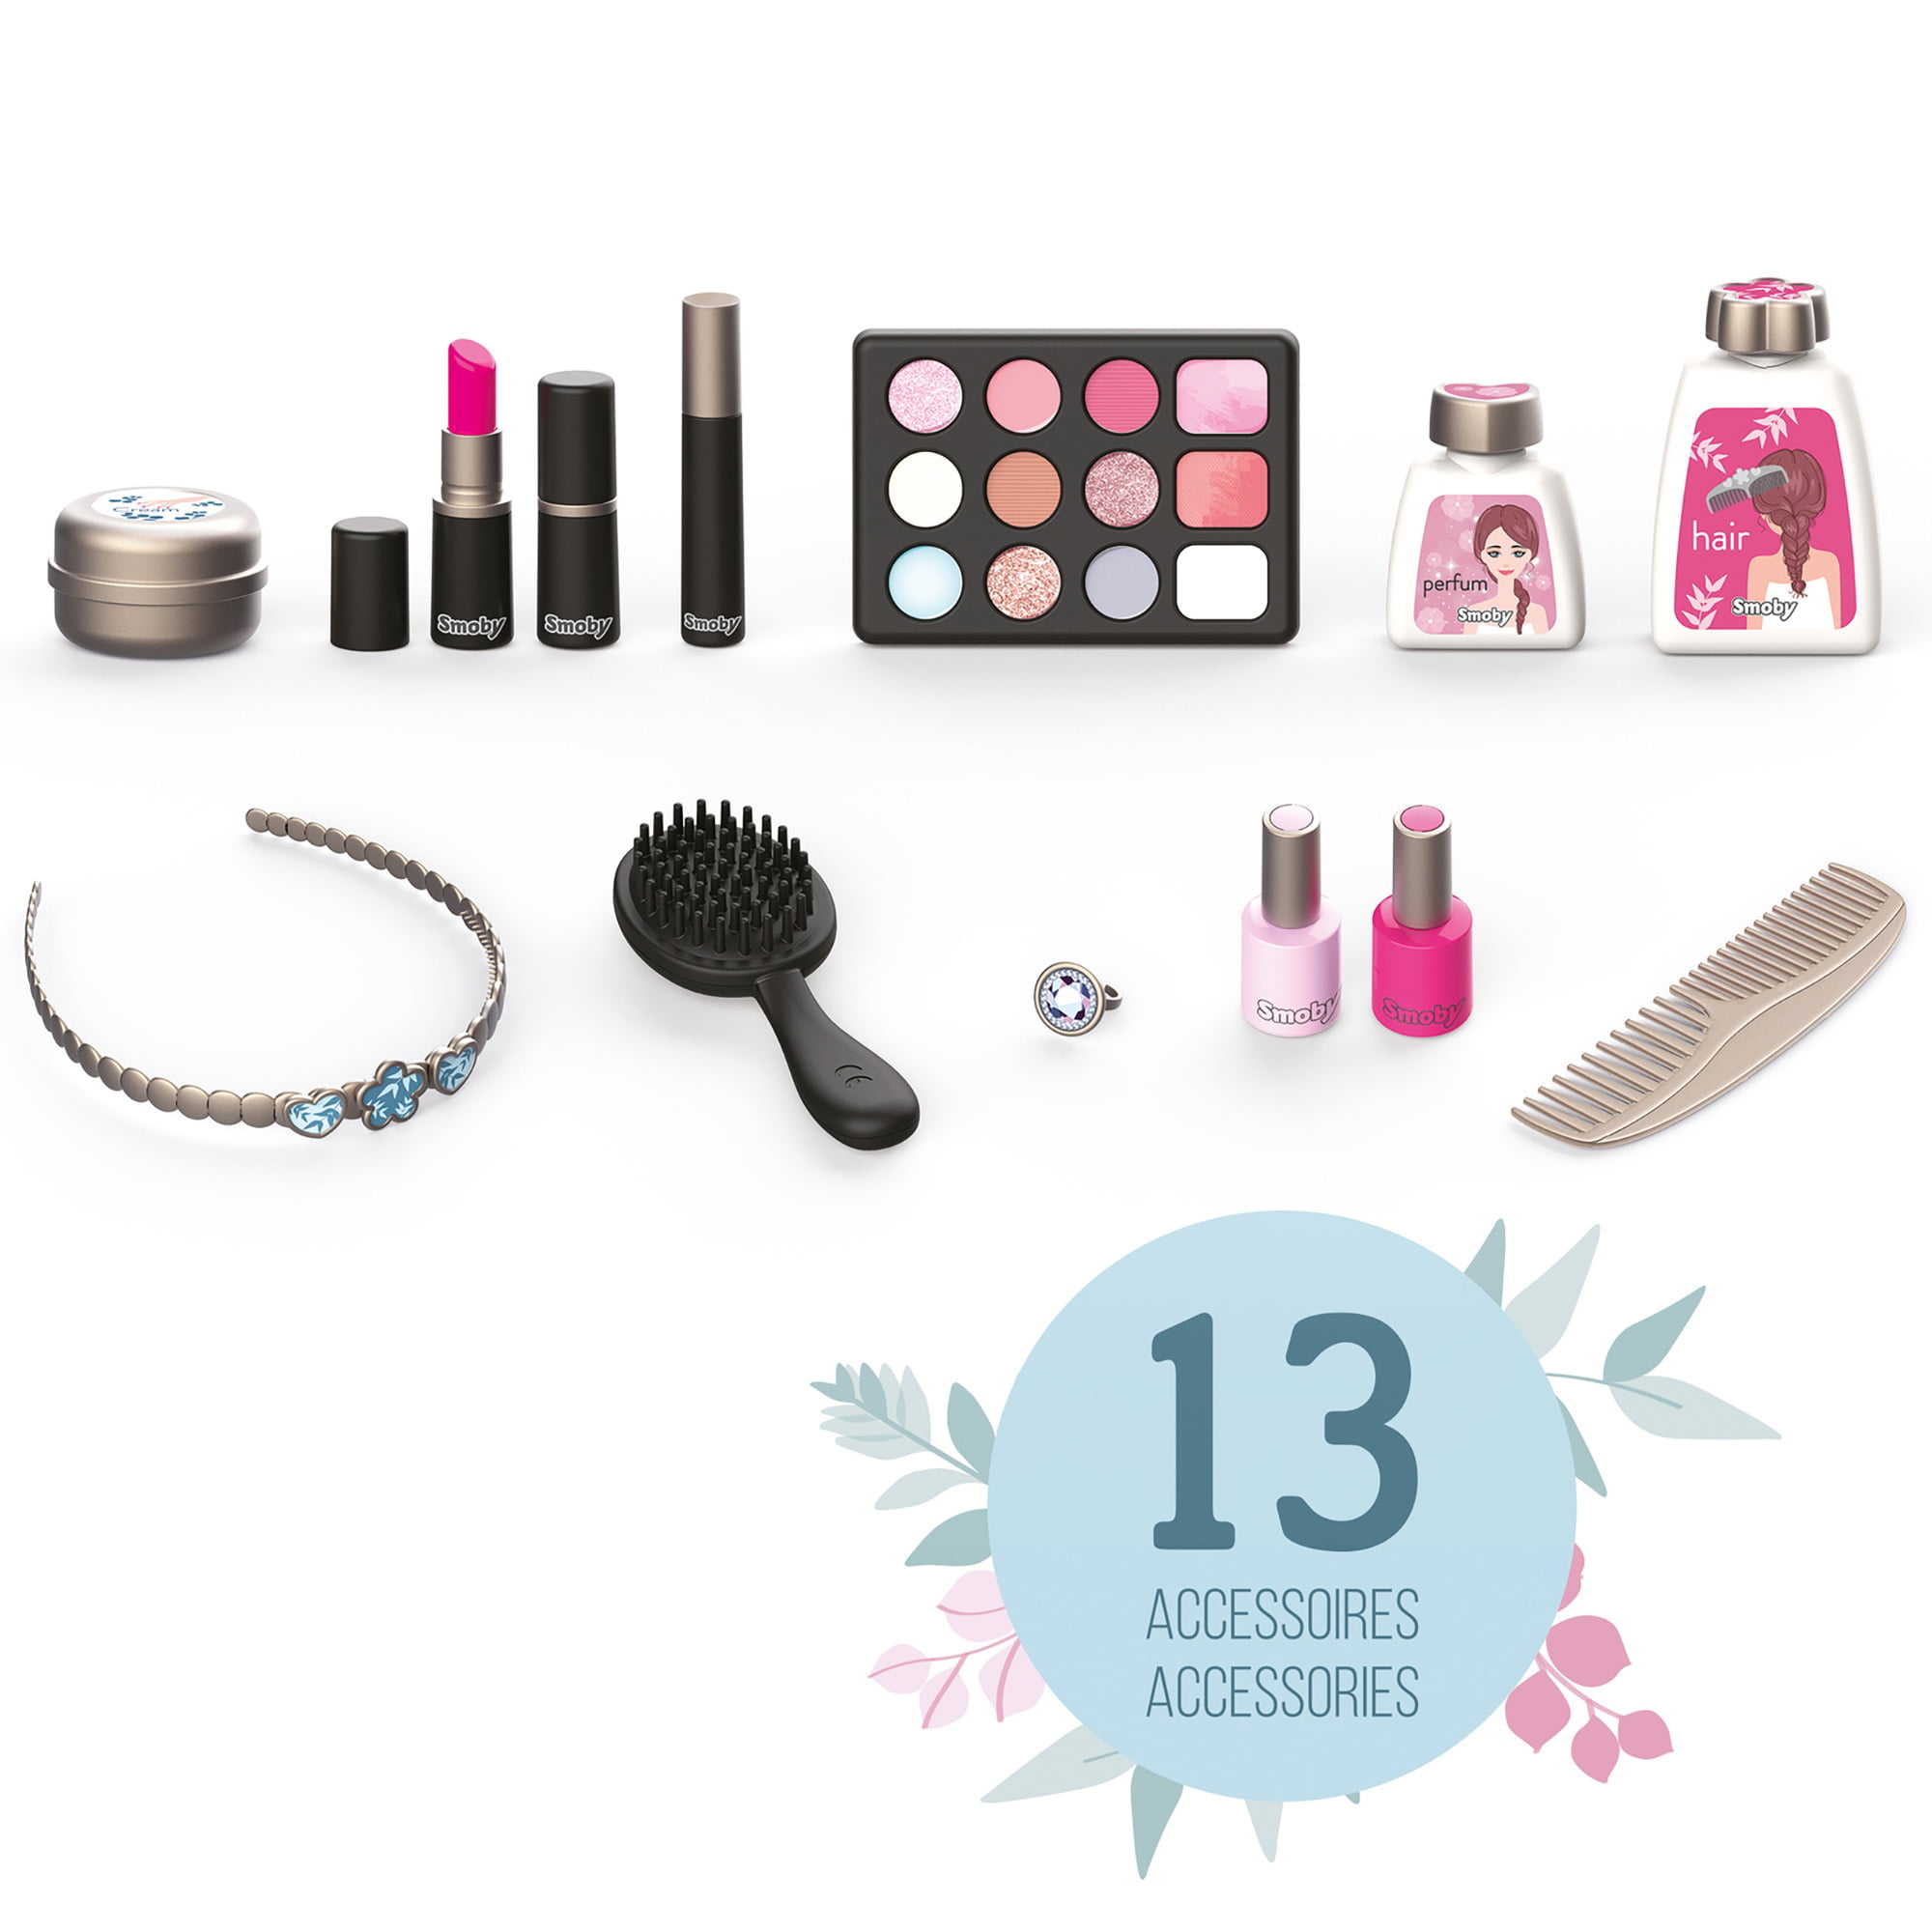 My Beauty Vanity: Carry Case - 13 Accessory Portable Case, Kids Role Play,  Smoby, Ages 3+